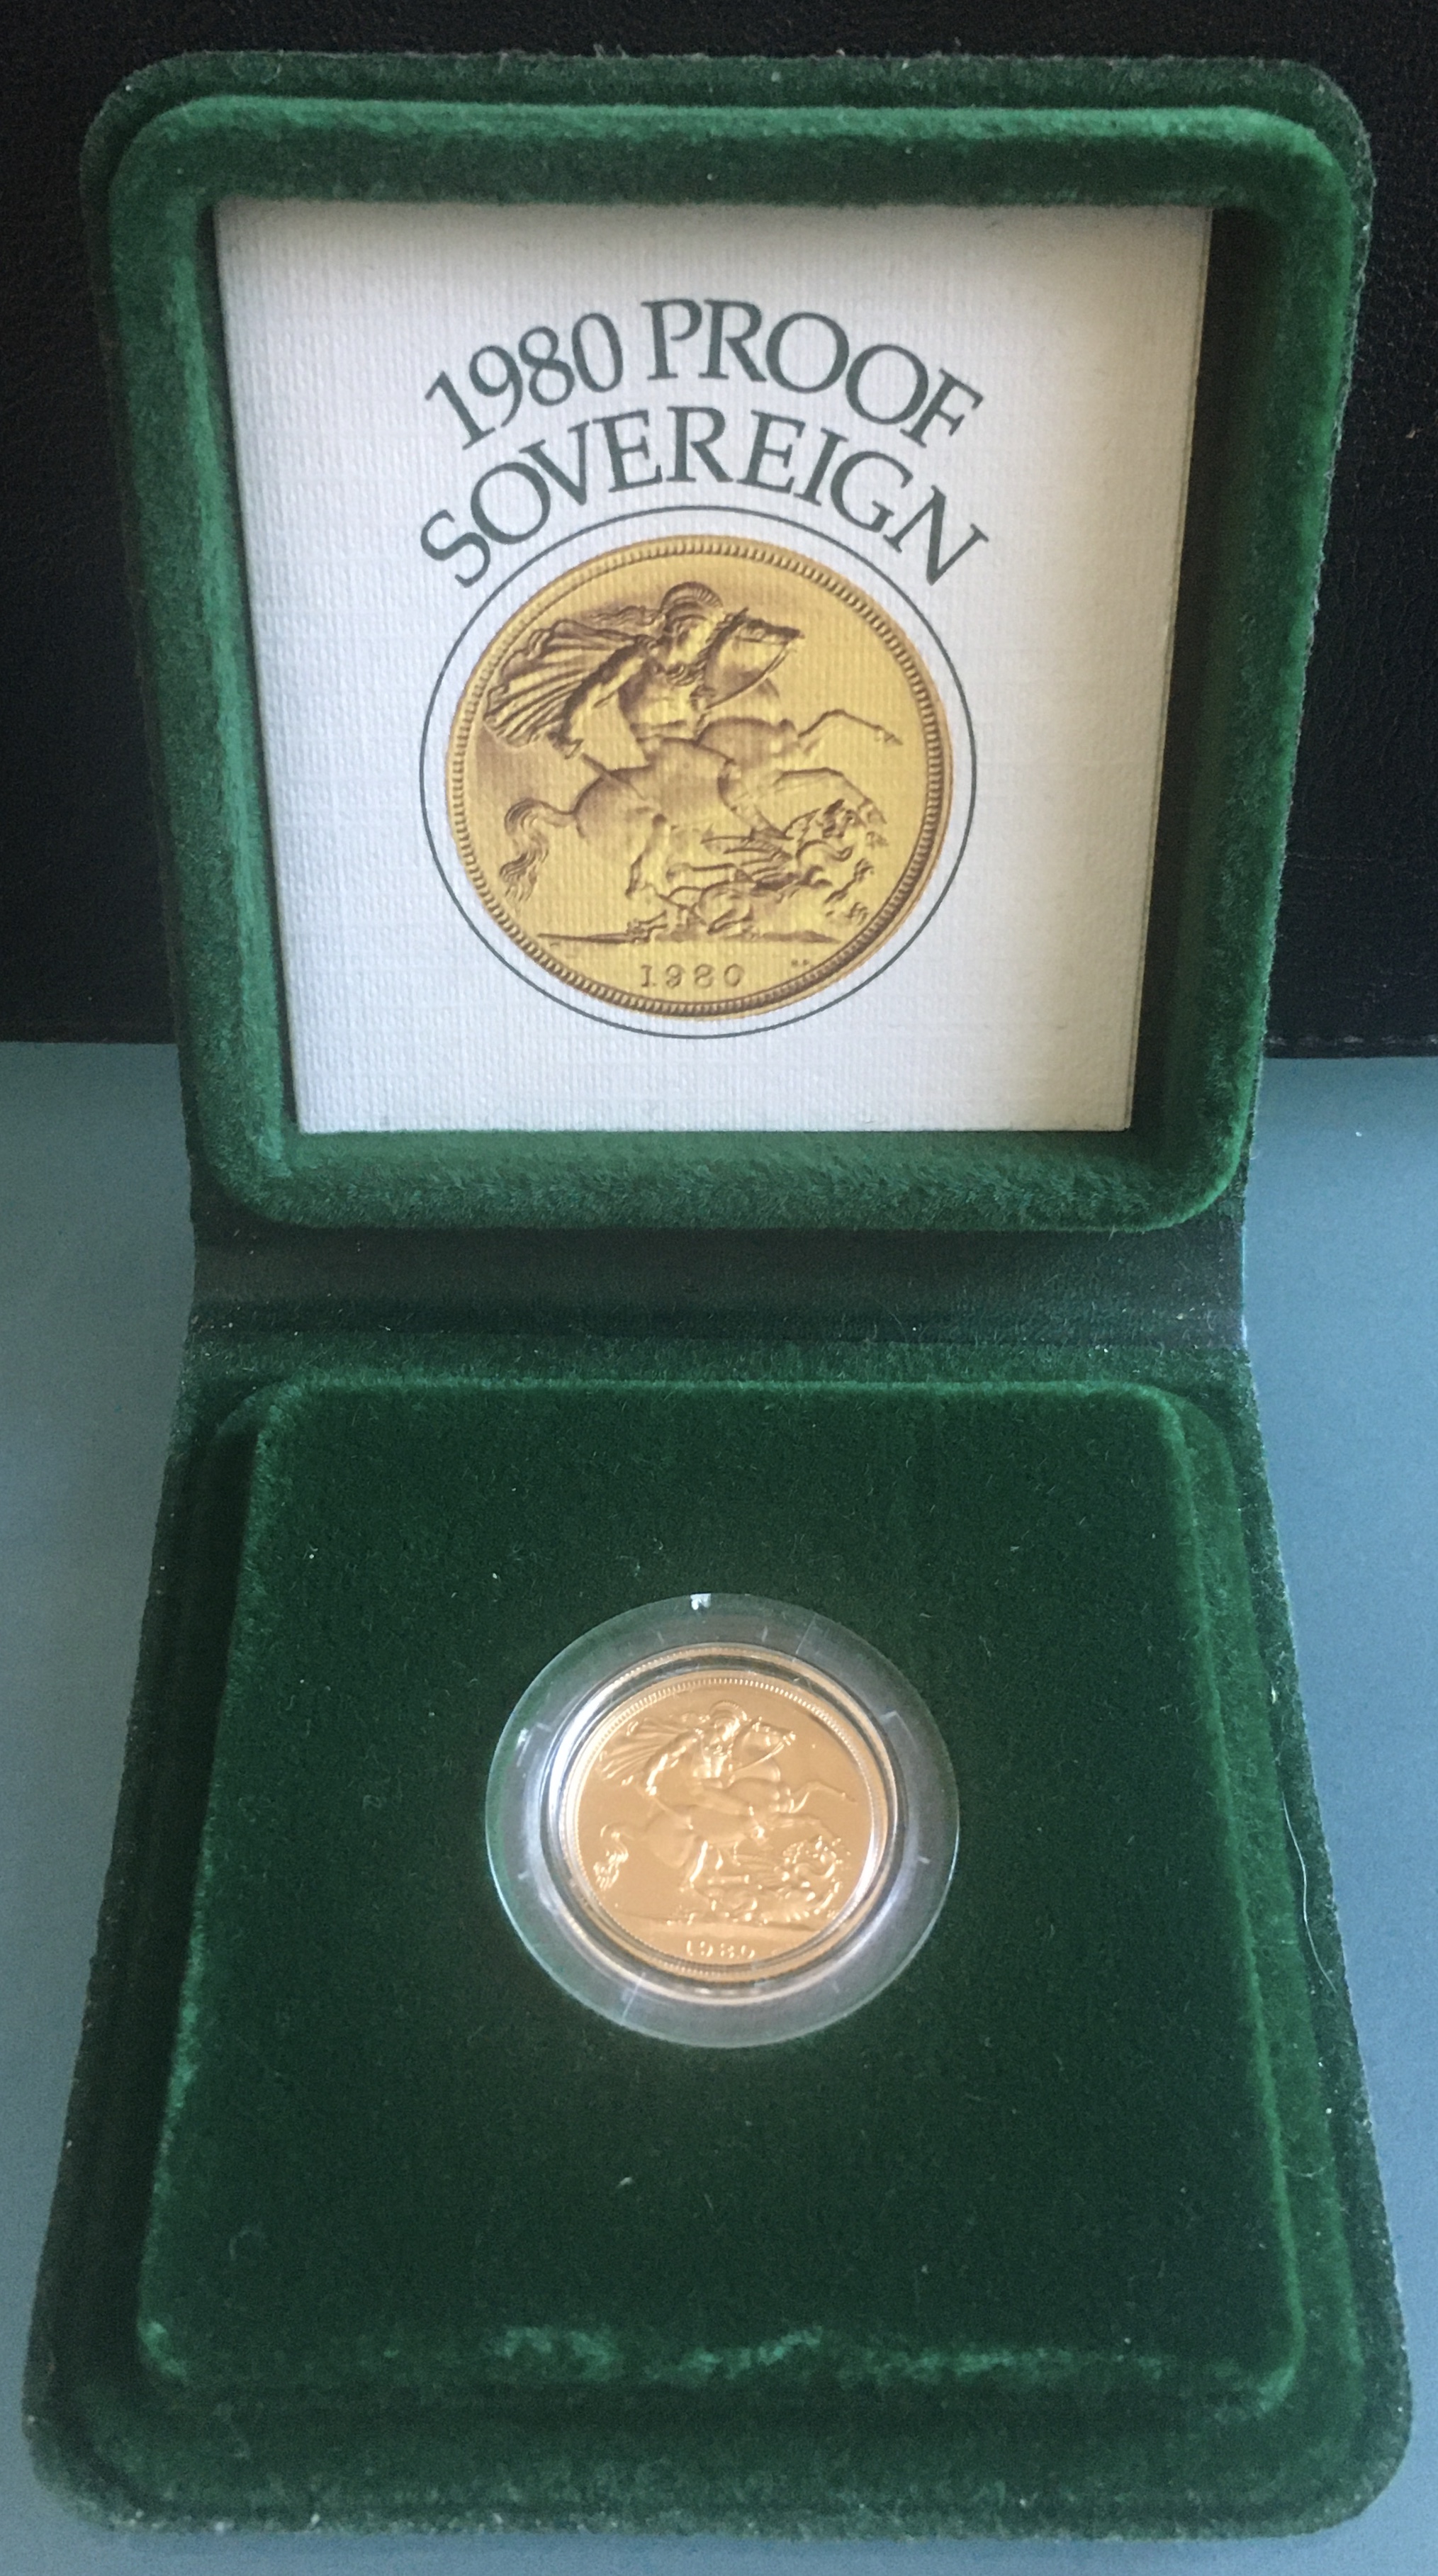 UK 1980 Gold Proof Sovereign